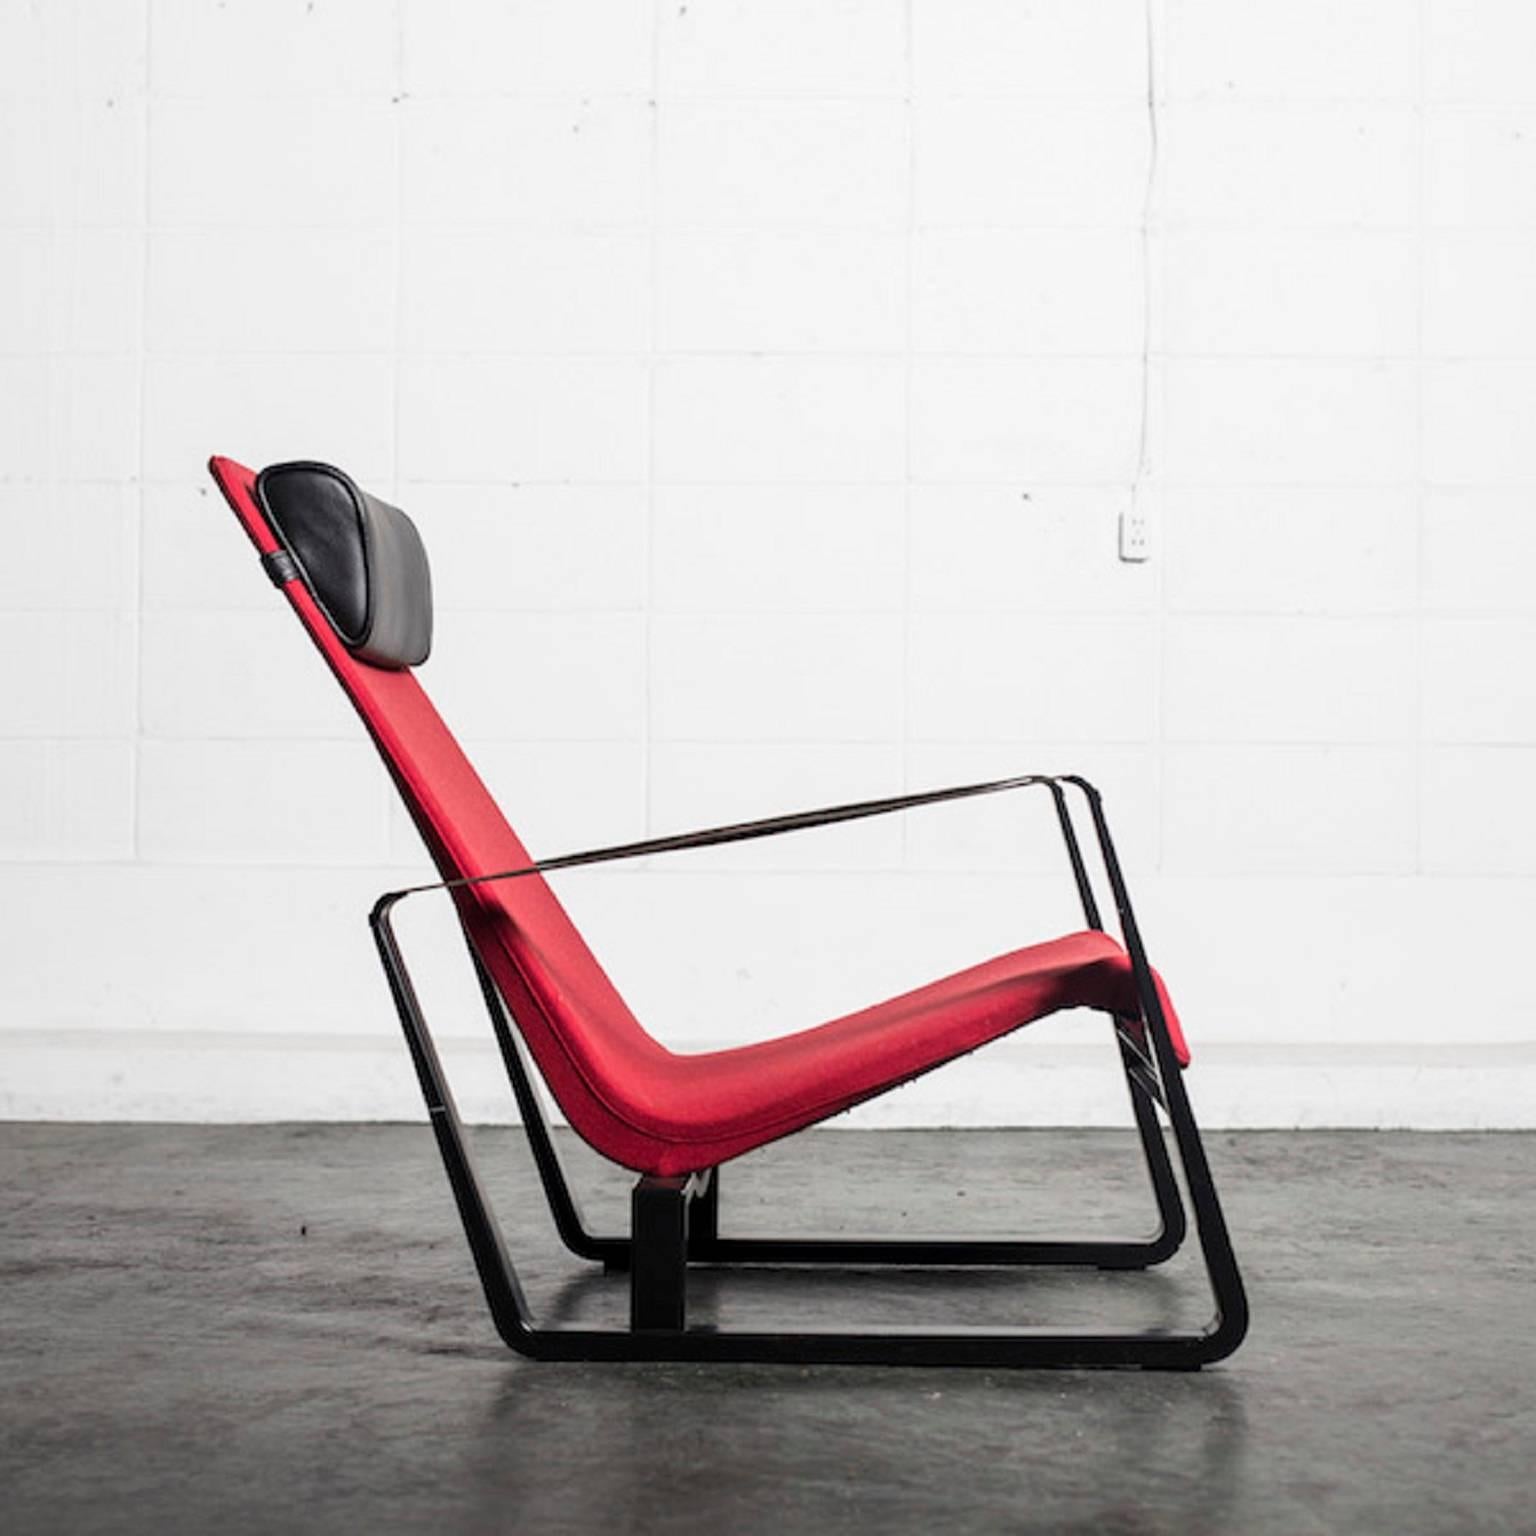 Jean Prouvé 1901-1984. Easy chair, model Cité. Red felt upholstery and
black-lacquered metal frame. Black harness leather arm straps. Loose
pillow upholstered in black leather. Designed in 1927. Produced by Tecta.
Display model.